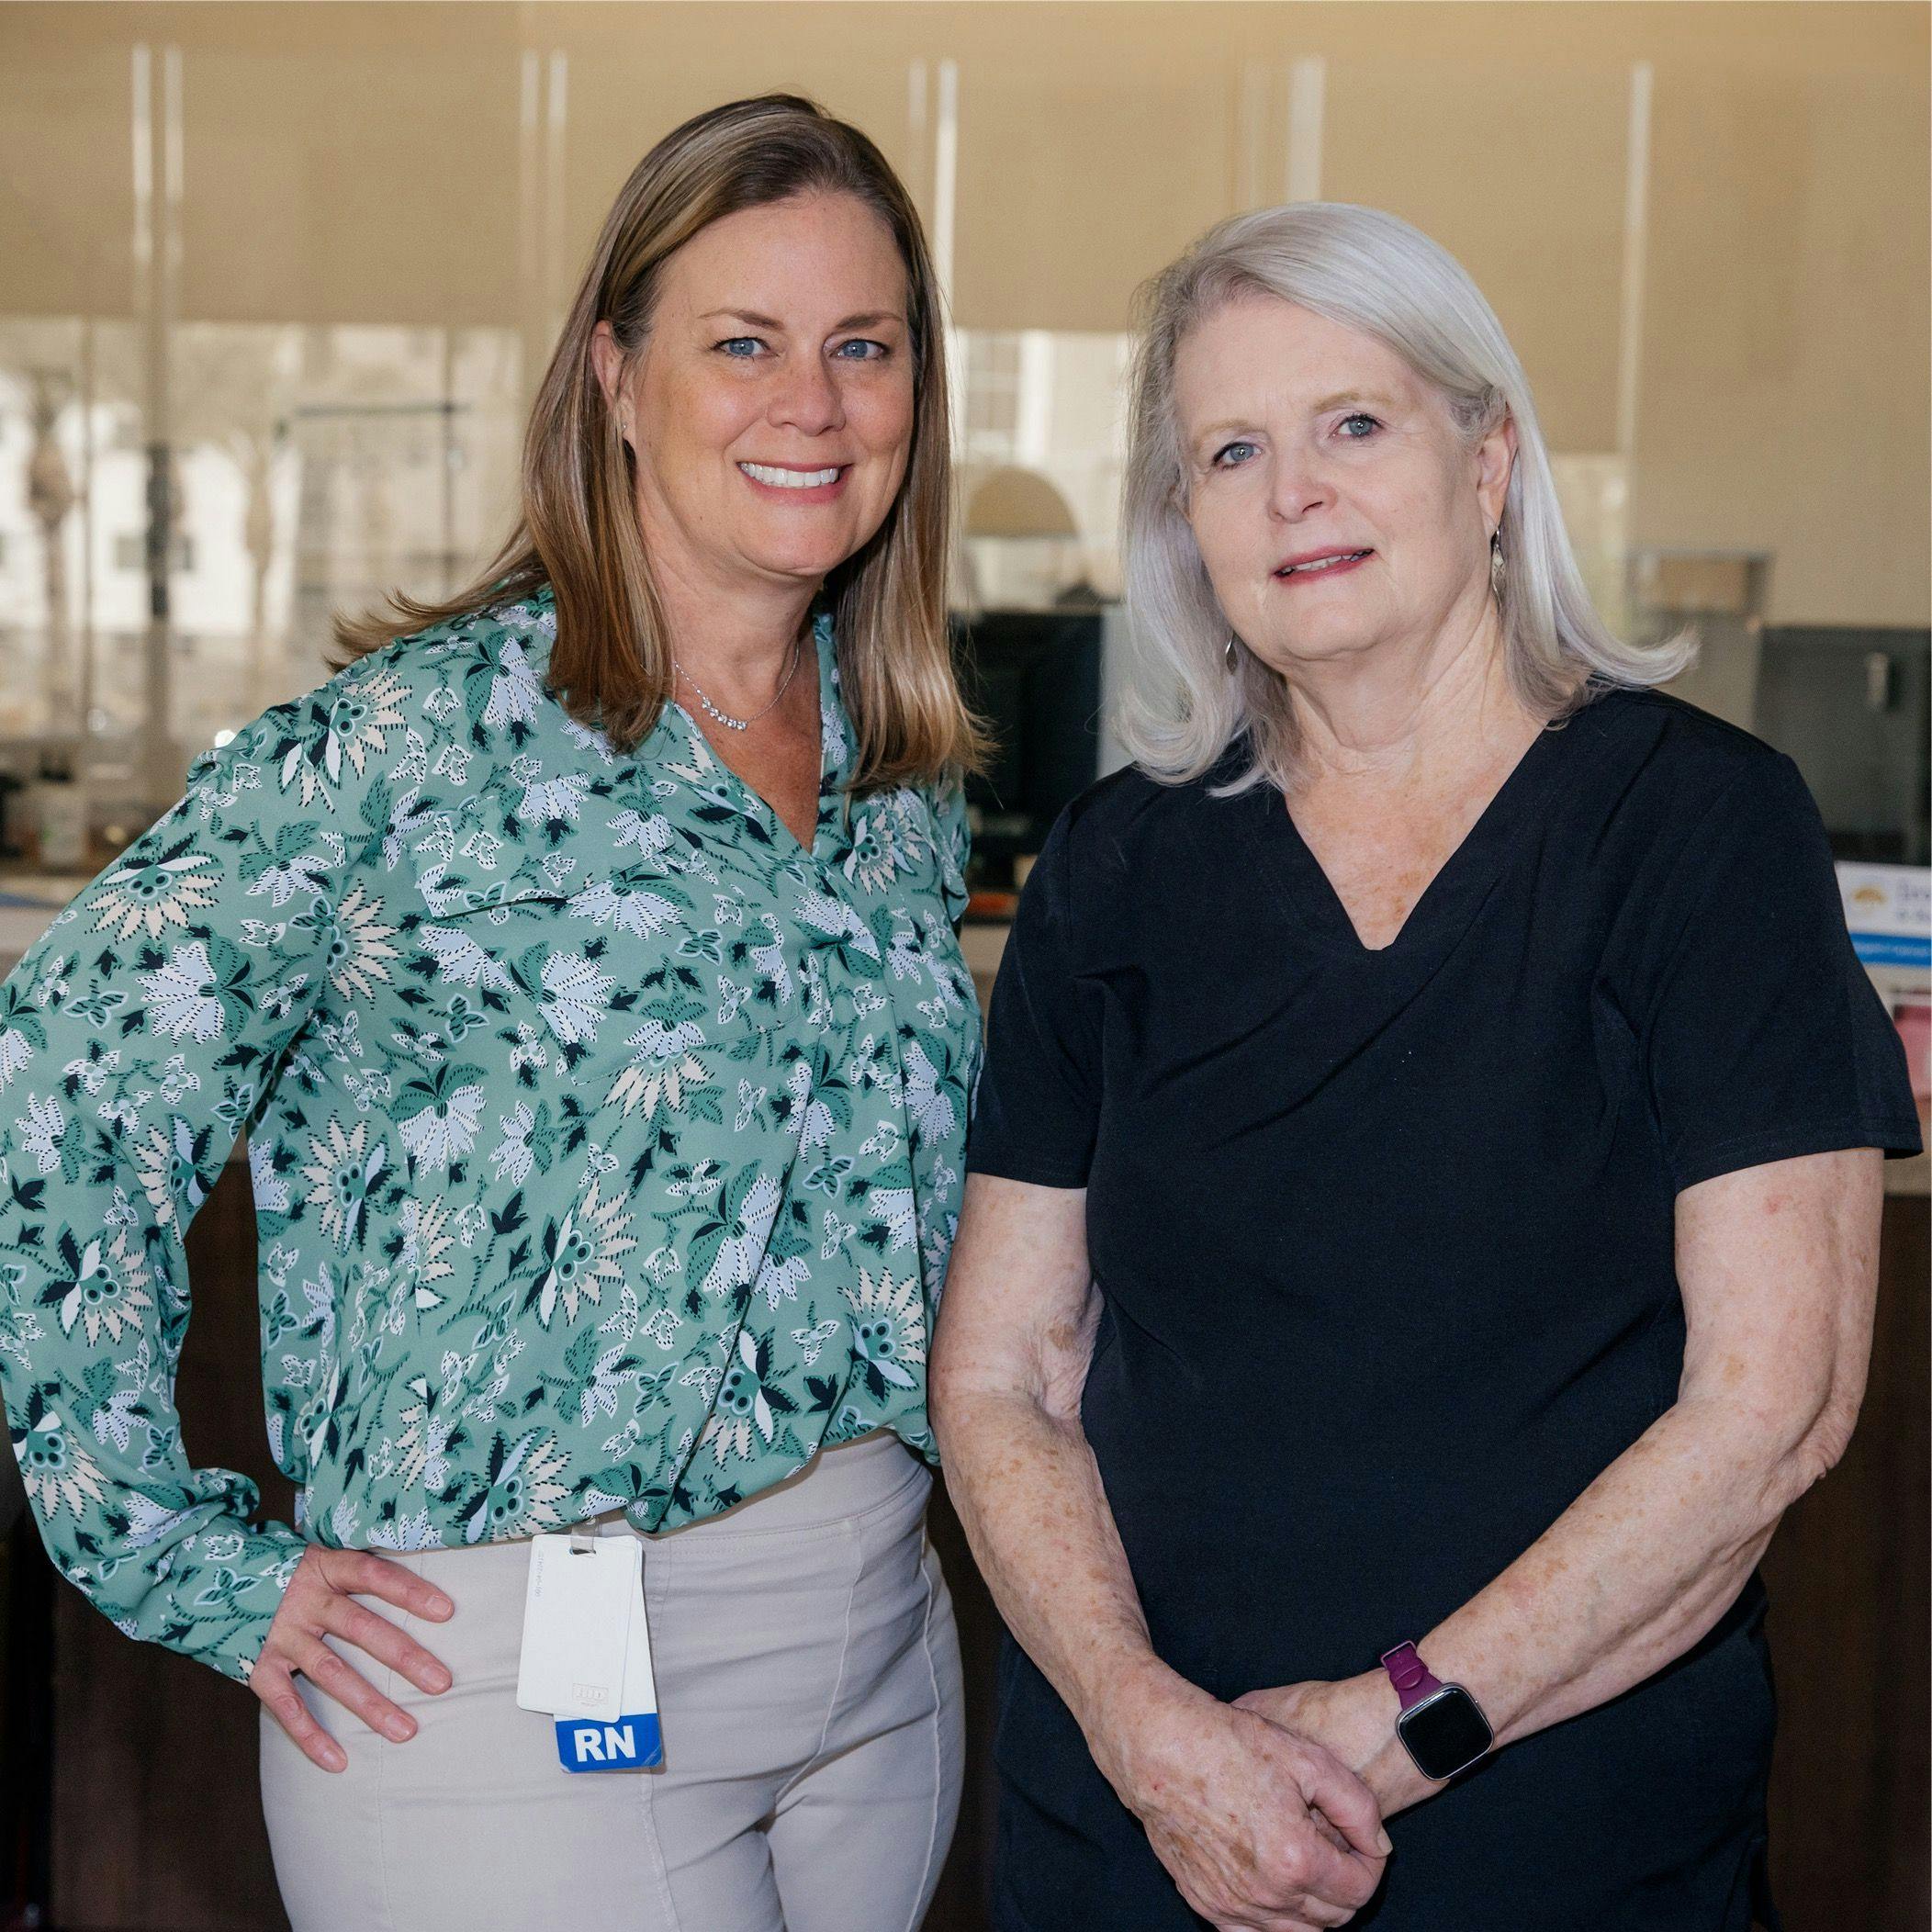 From left: Lori Shattuck, RN, OCN and Kathy Shine,  B.S.N., RN, two oncology nurses smiling at the camera |    Photo by: Azula Raun 